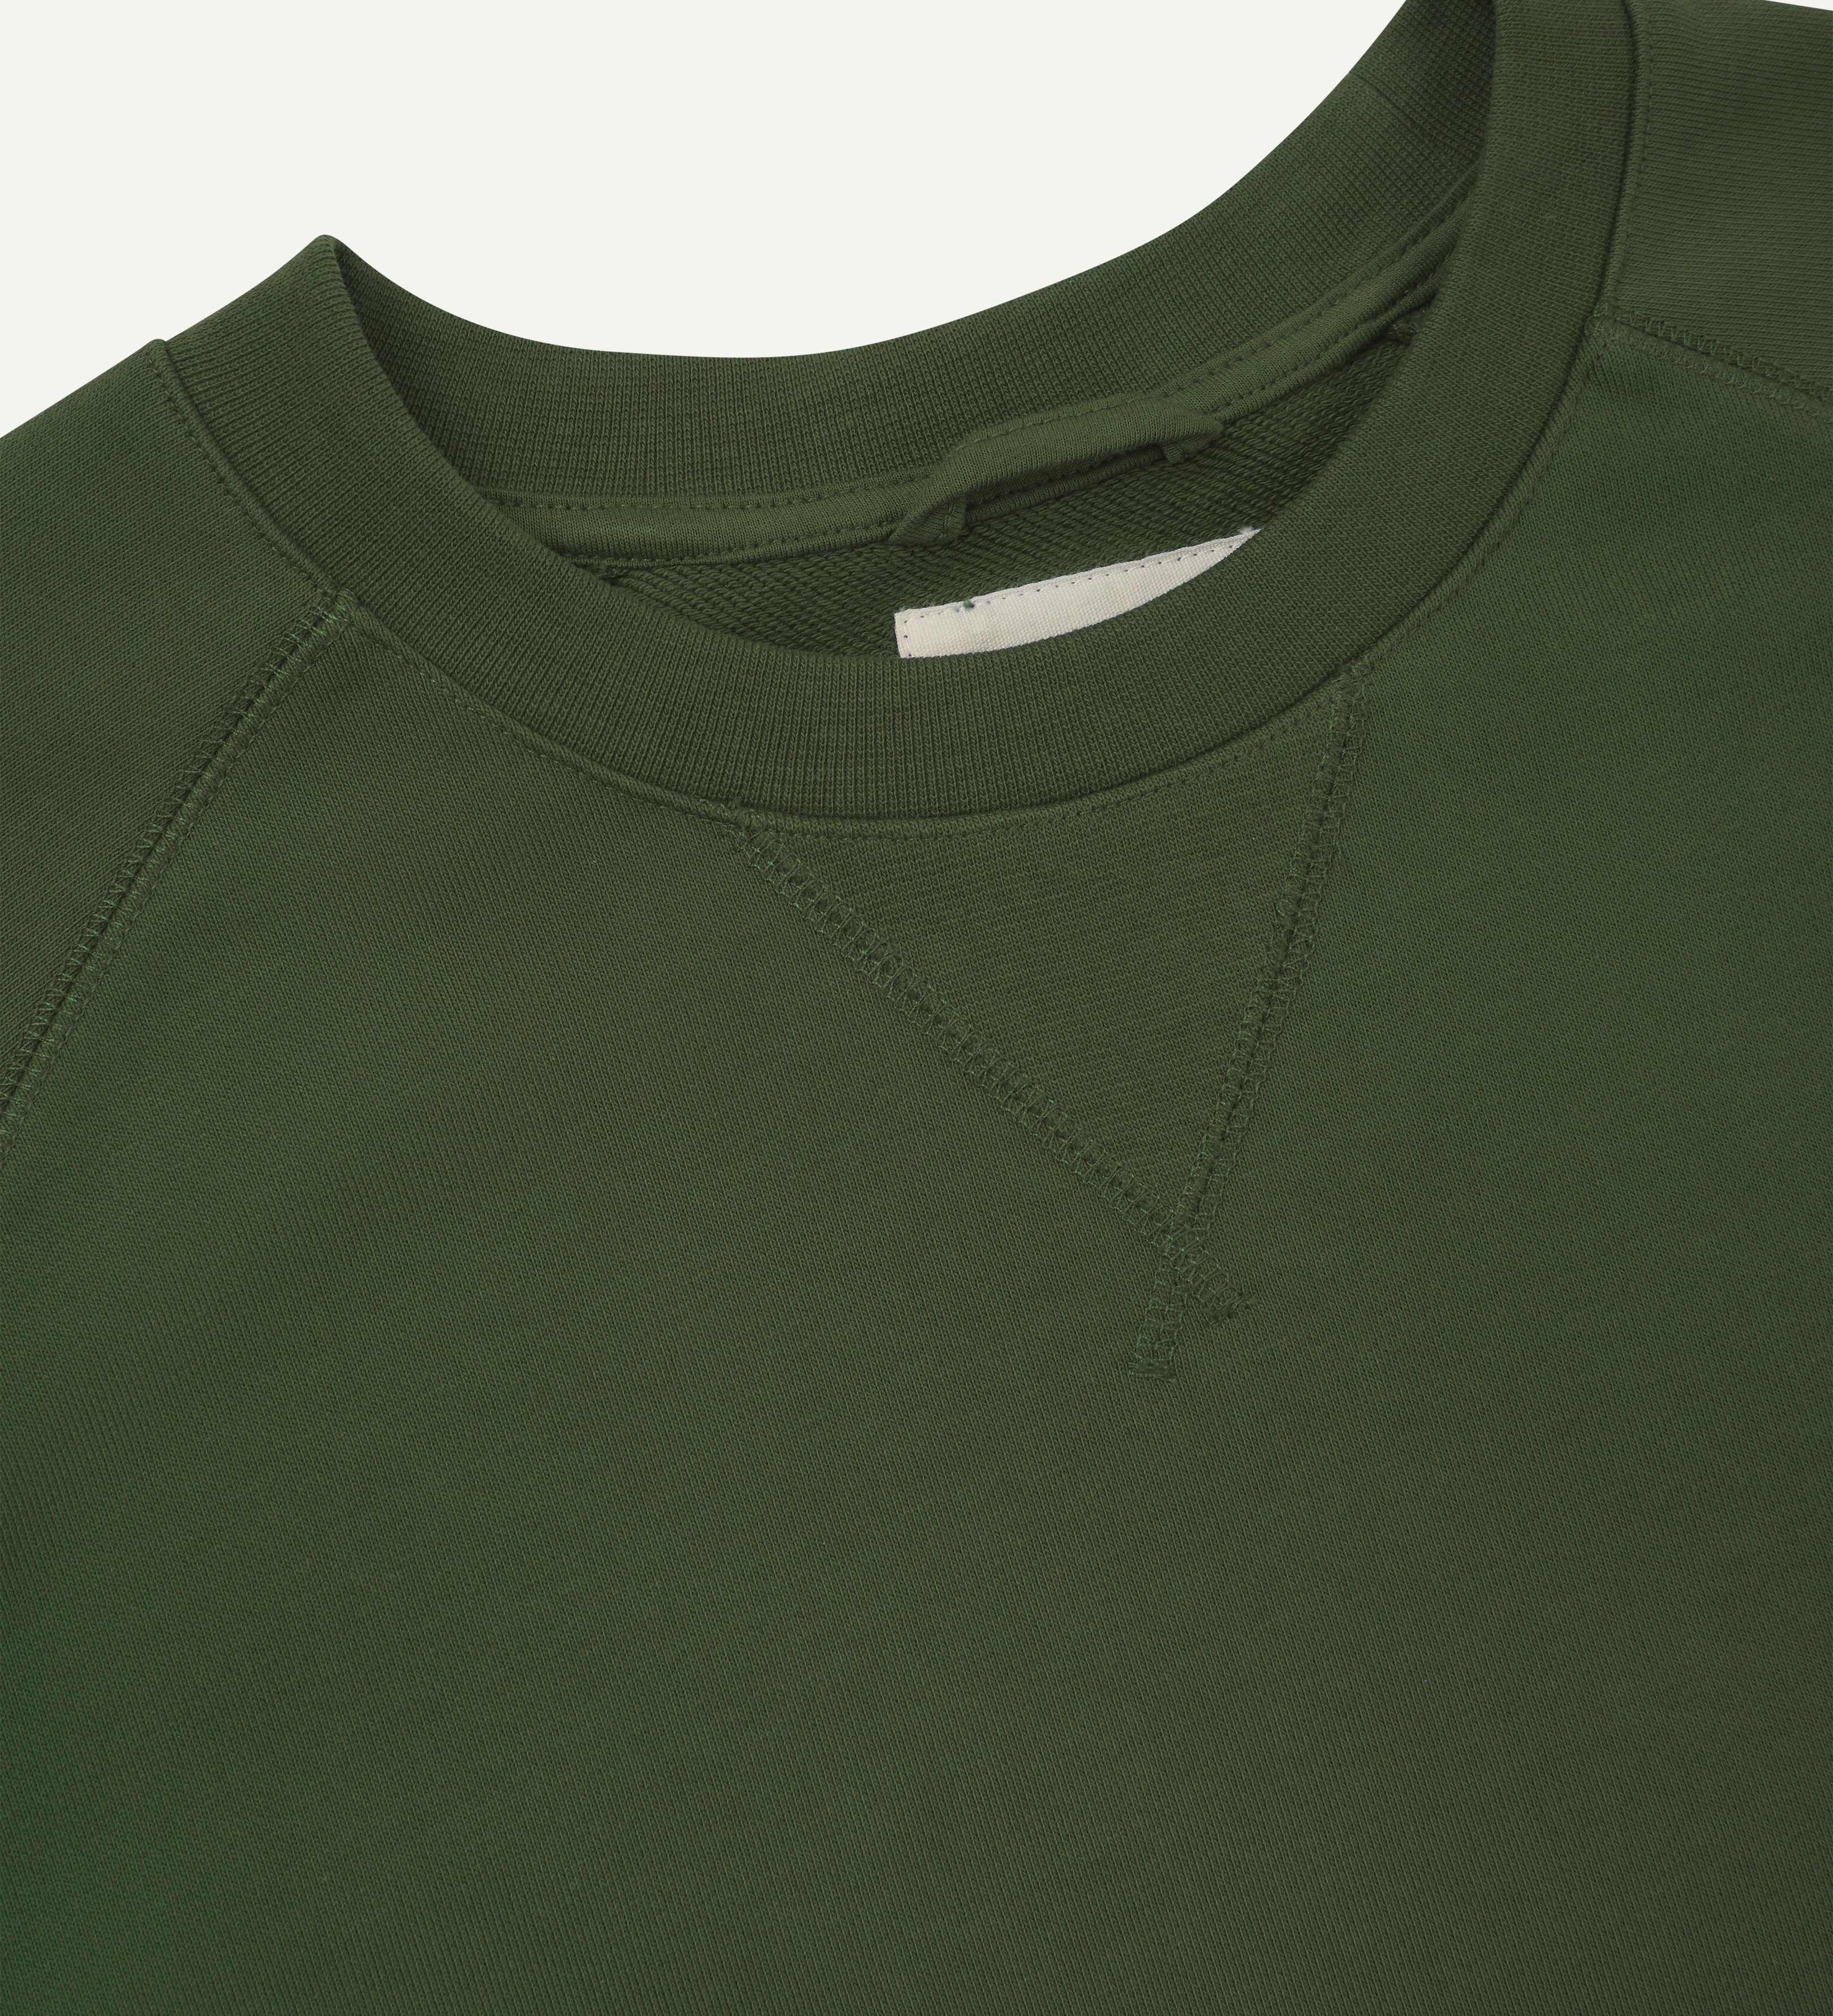 Front close-up collar view of green organic heavyweight cotton #7005 jersey sweatshirt by Uskees.